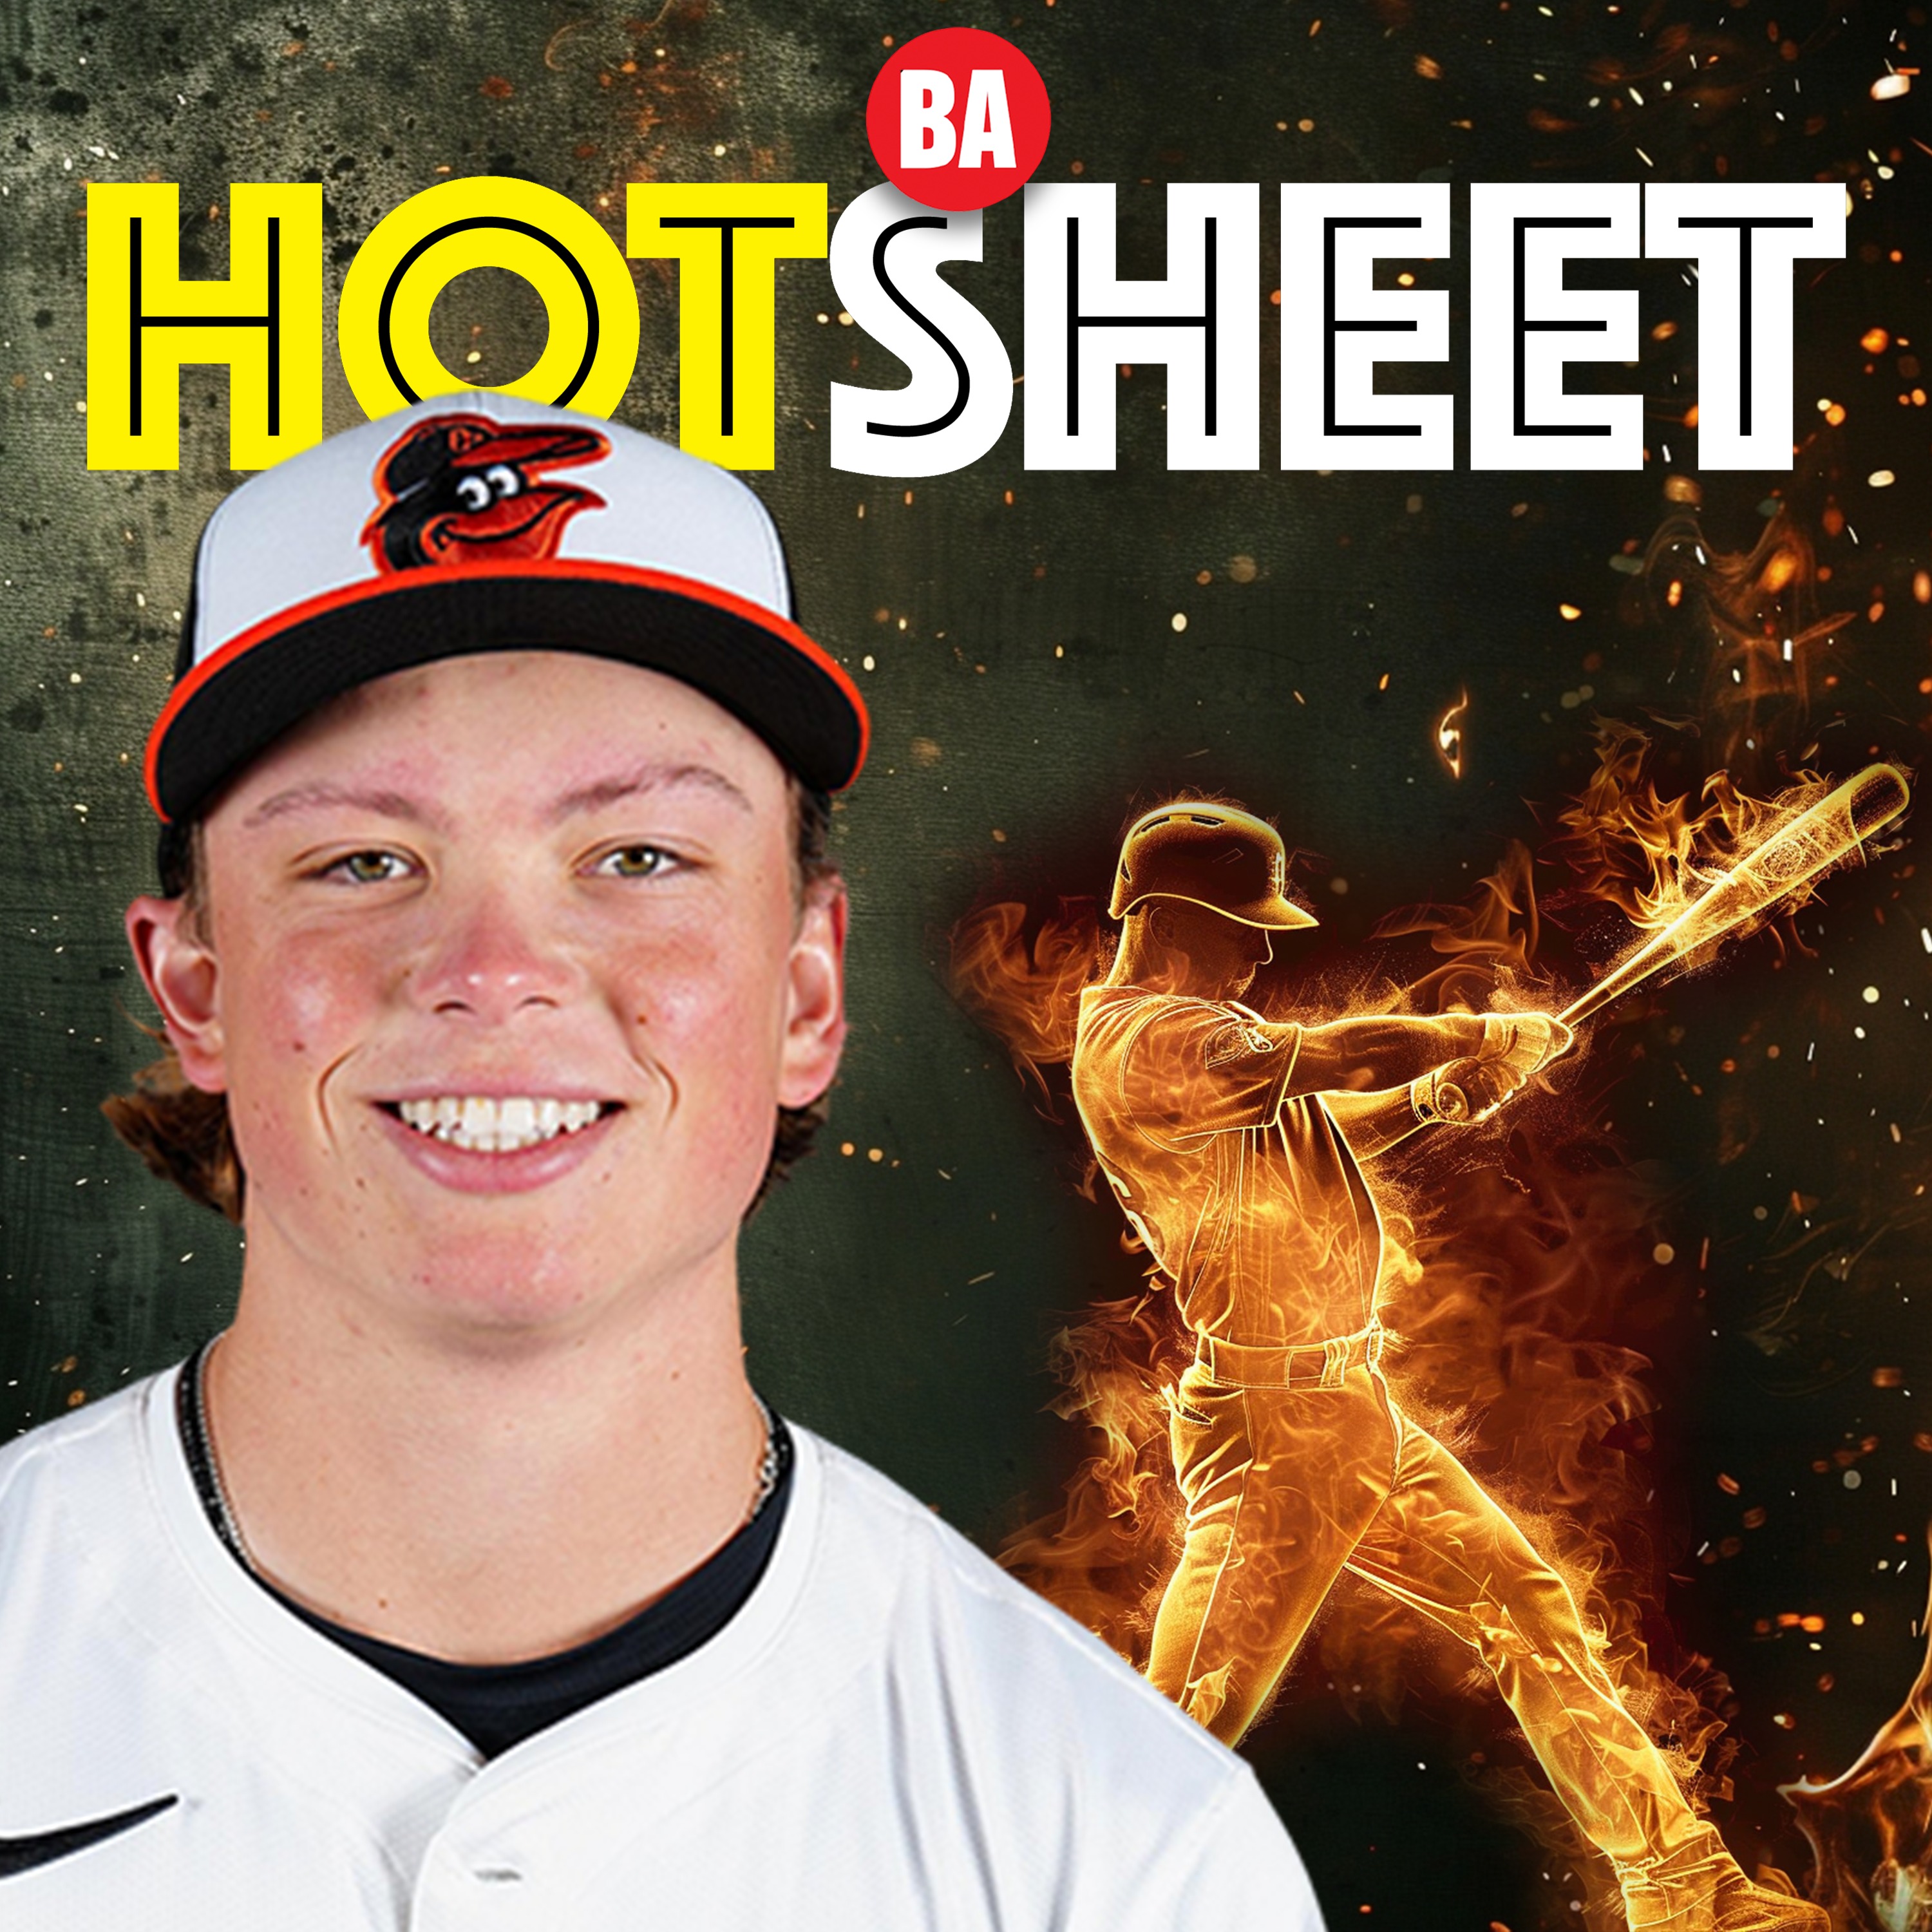 Top 100 Prospects Update, Charlie Condon Draft Buzz & More | Hot Sheet Show Ep. 1